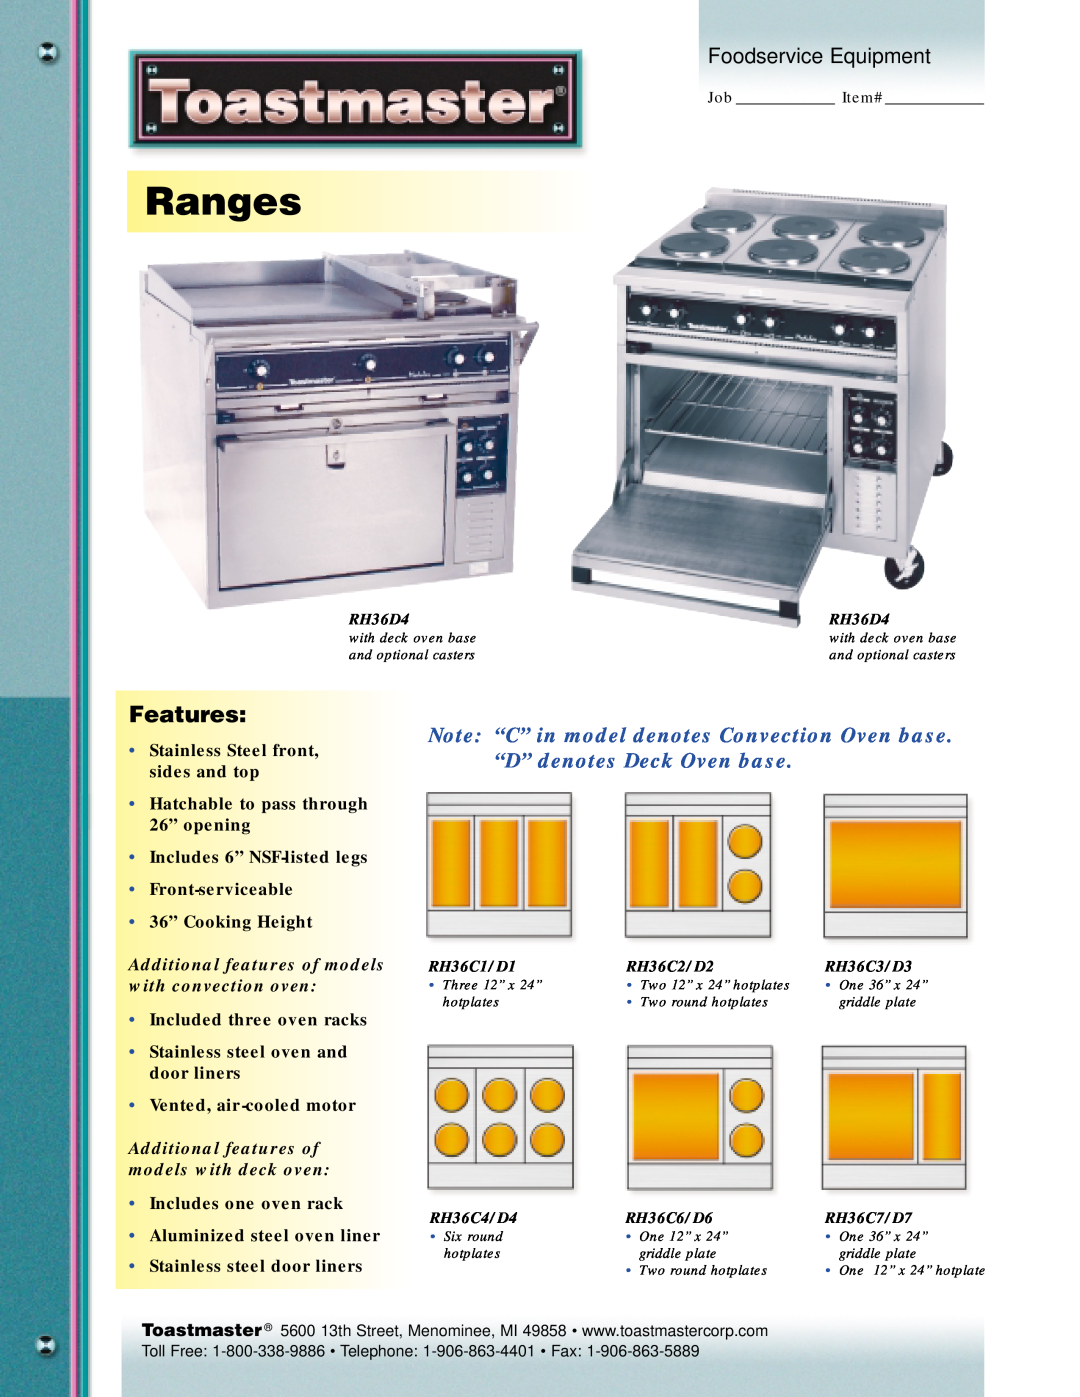 Toastmaster RH36D4 manual Ranges, Features, Foodservice Equipment, Additional features of models with convection oven 